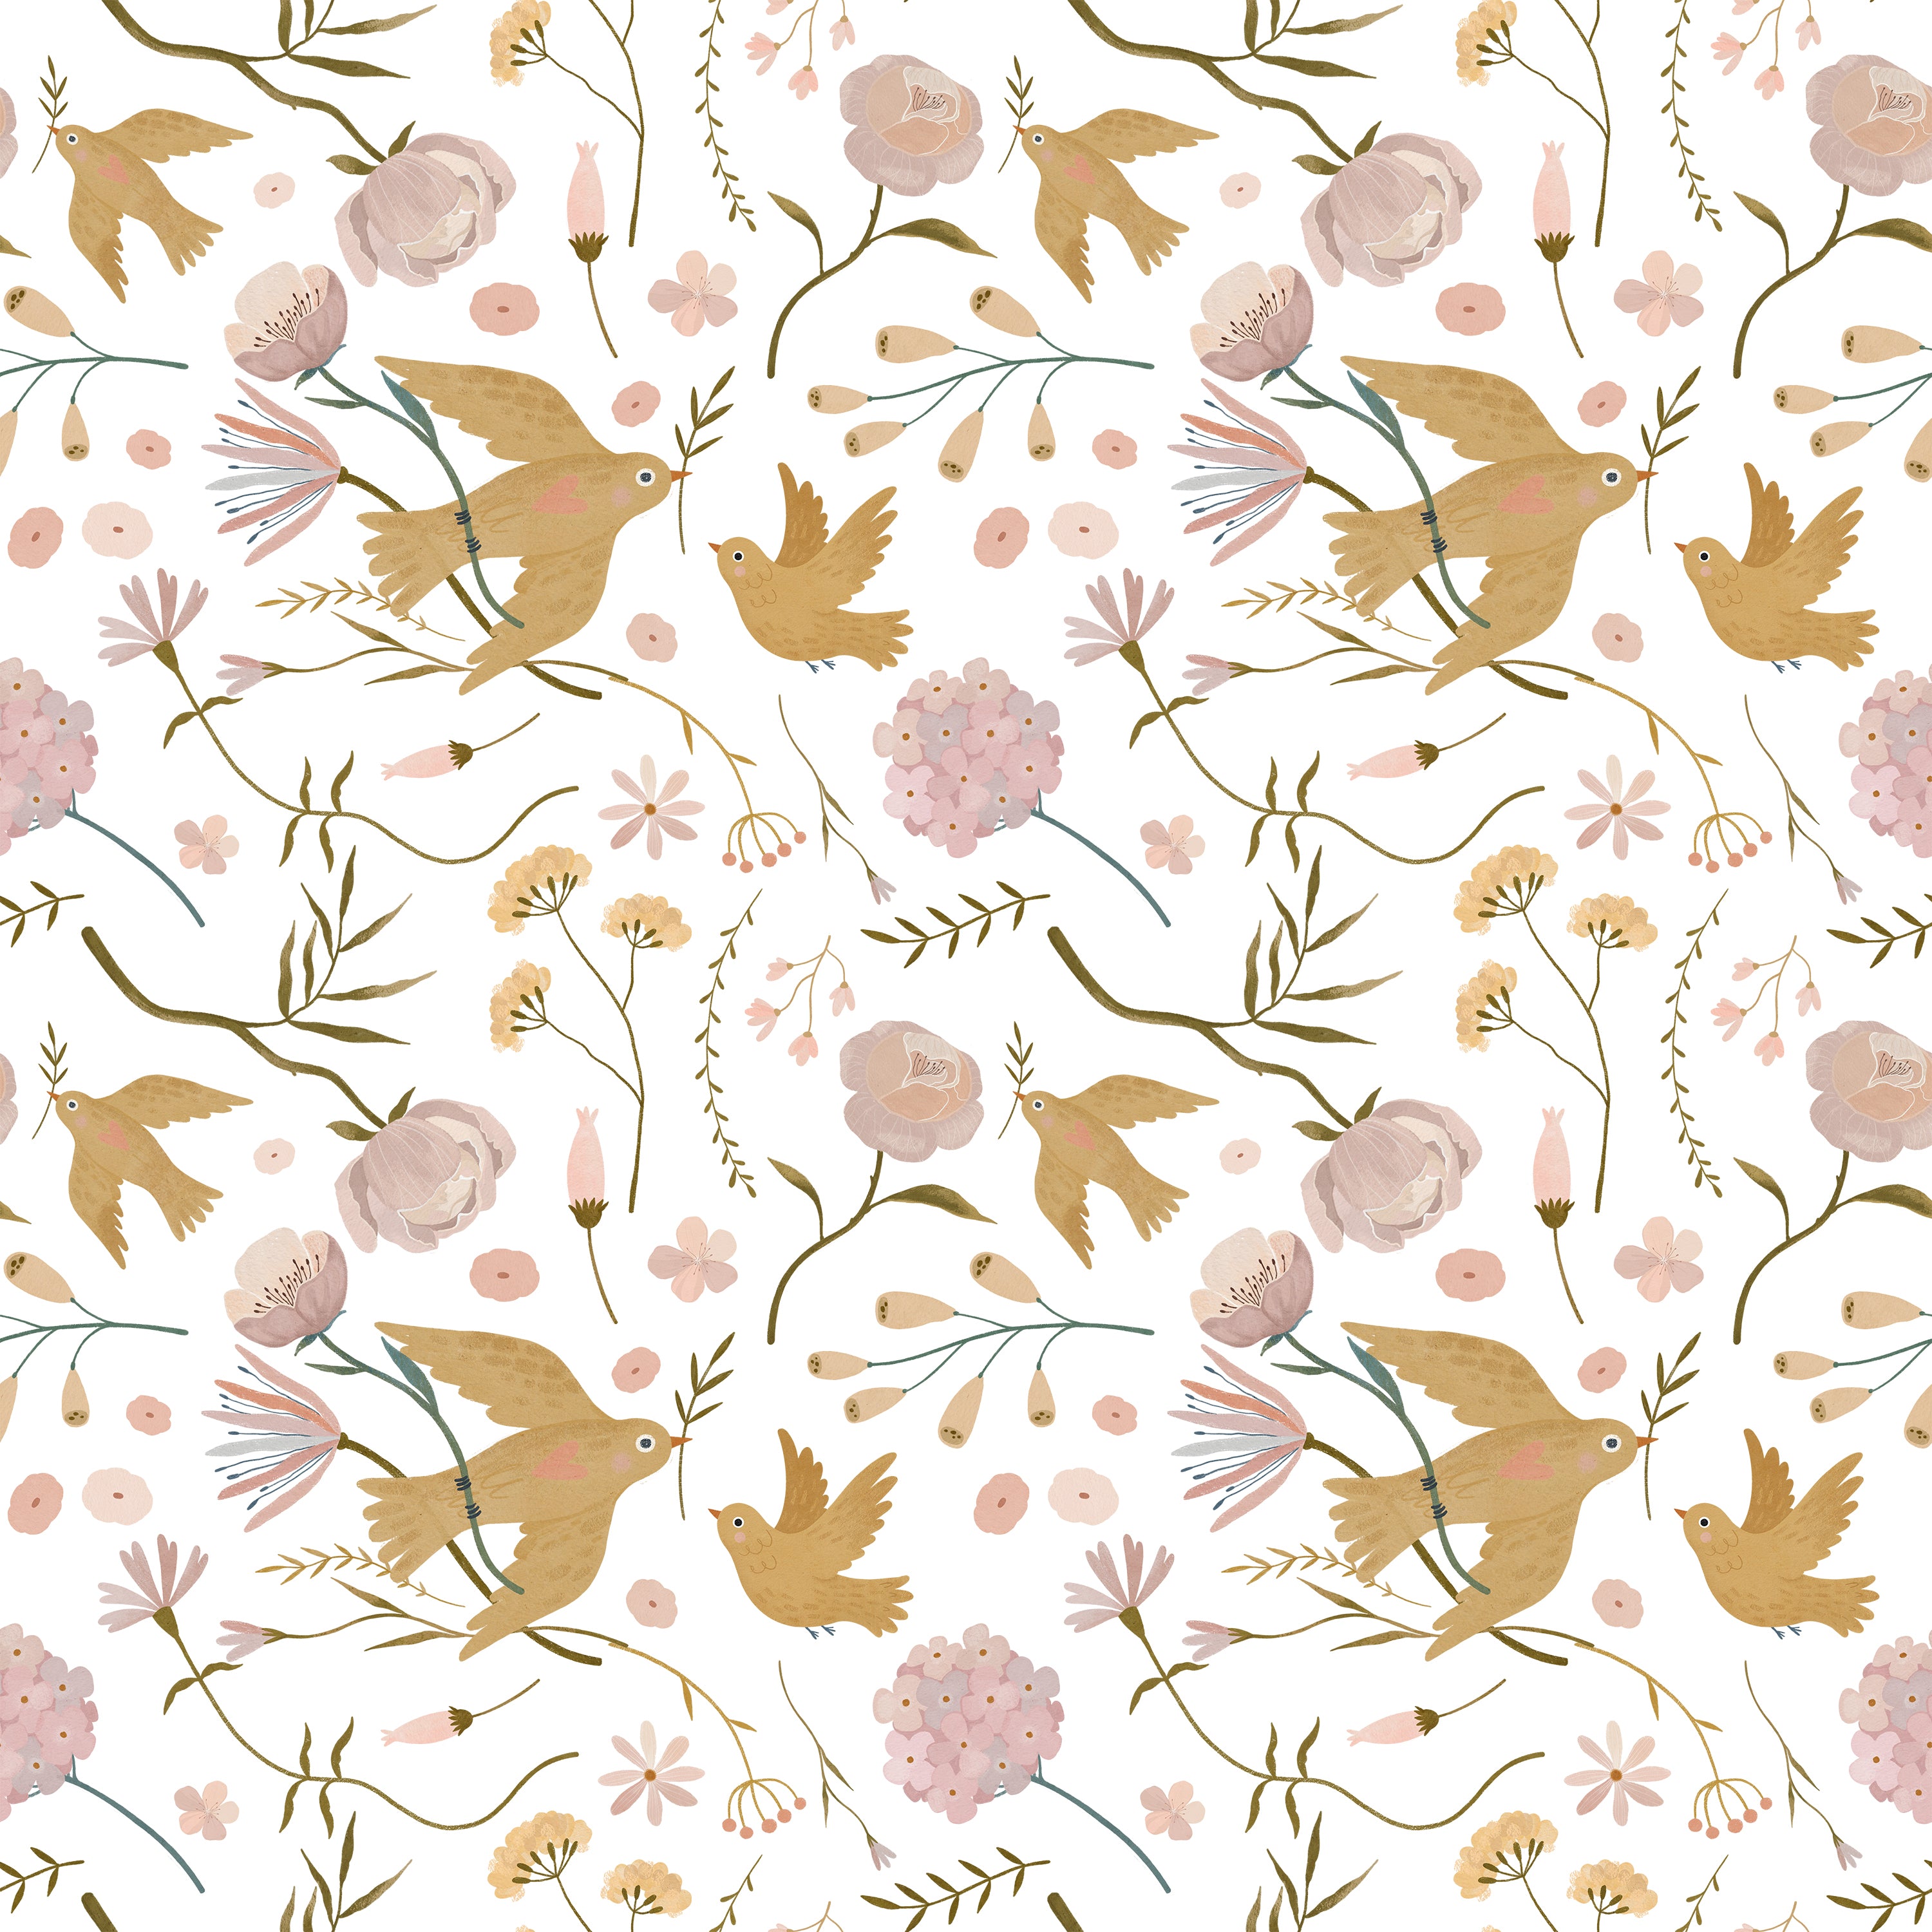 Detailed view of the Pastel Garden Wallpaper, showcasing a pattern of pink and beige flowers, green leaves, and playful birds. This design infuses spaces with a gentle, nature-inspired aesthetic